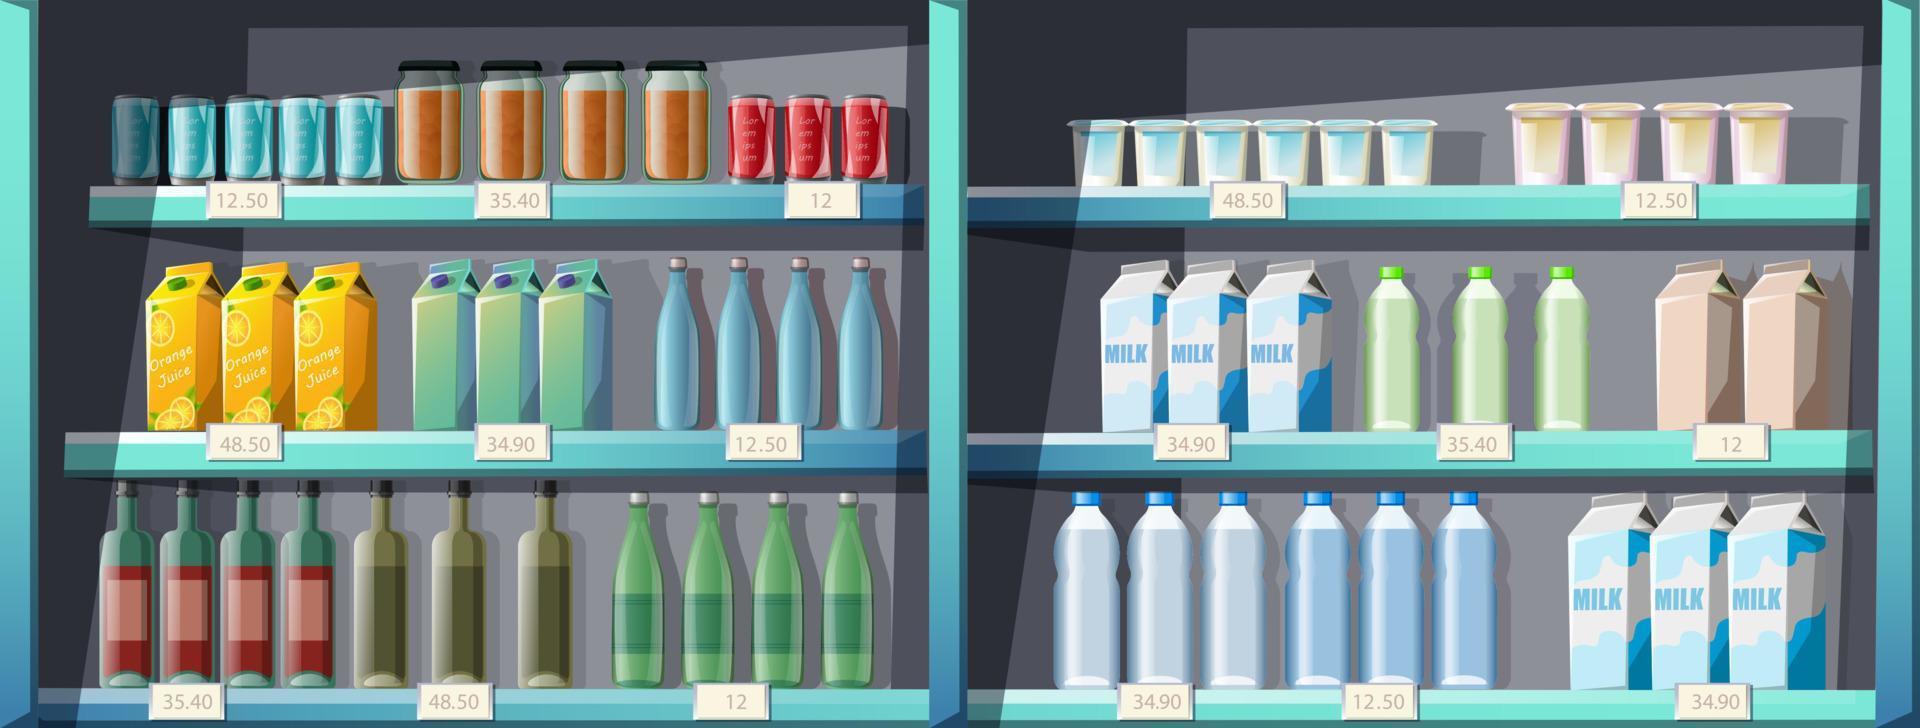 Vector seamless cartoon style supermarket shelves with products, food, drinks.